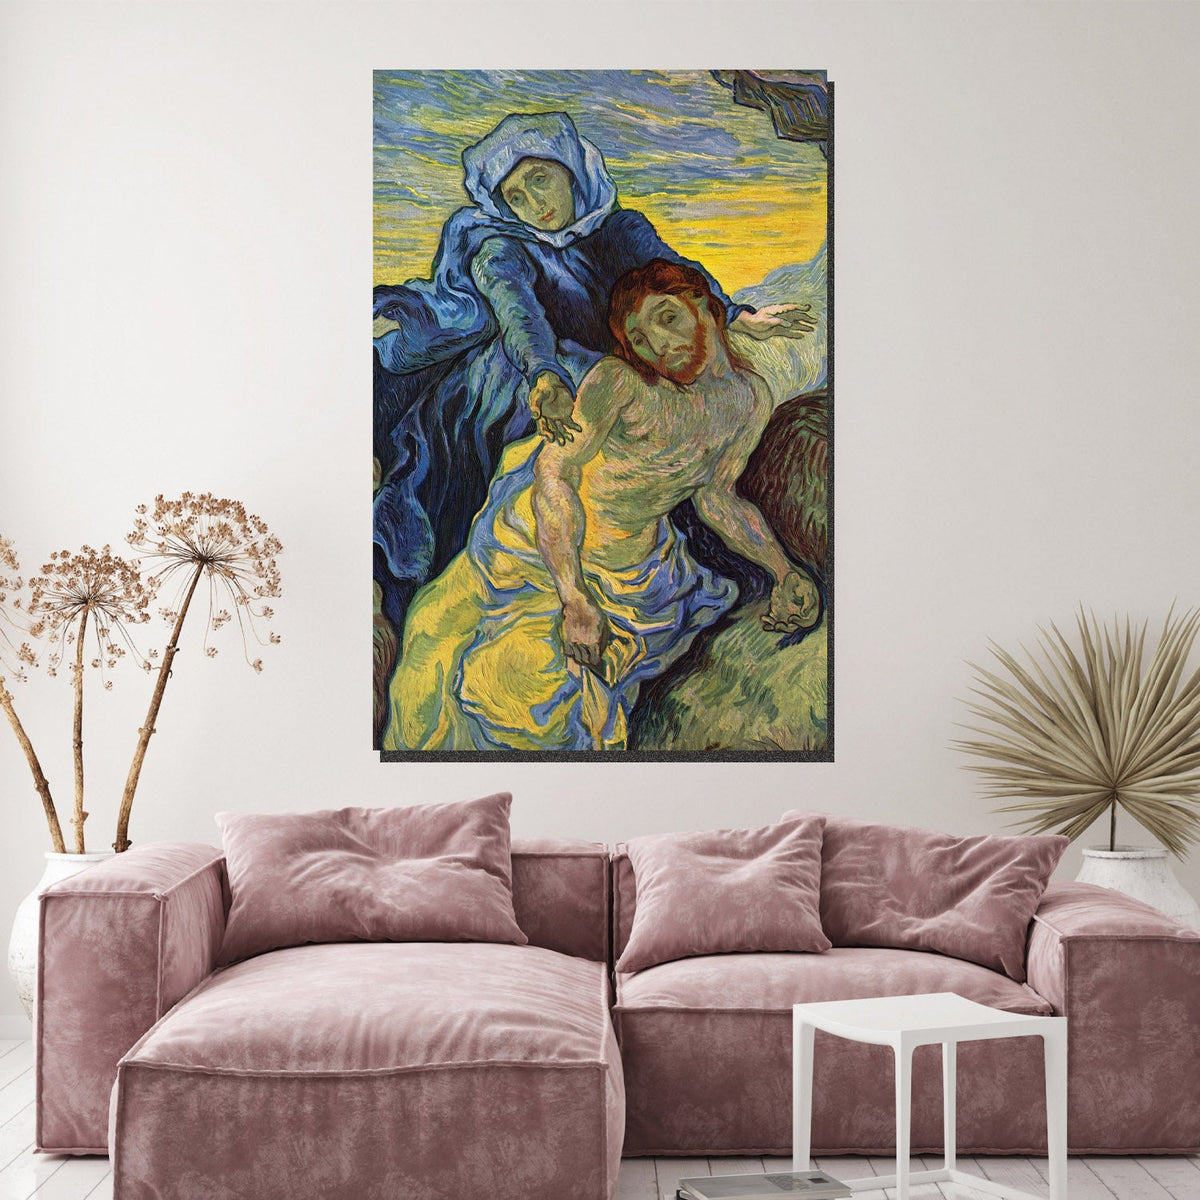 https://cdn.shopify.com/s/files/1/0387/9986/8044/products/ThePietabyVanGoghCanvasArtPrintStretched-1.jpg